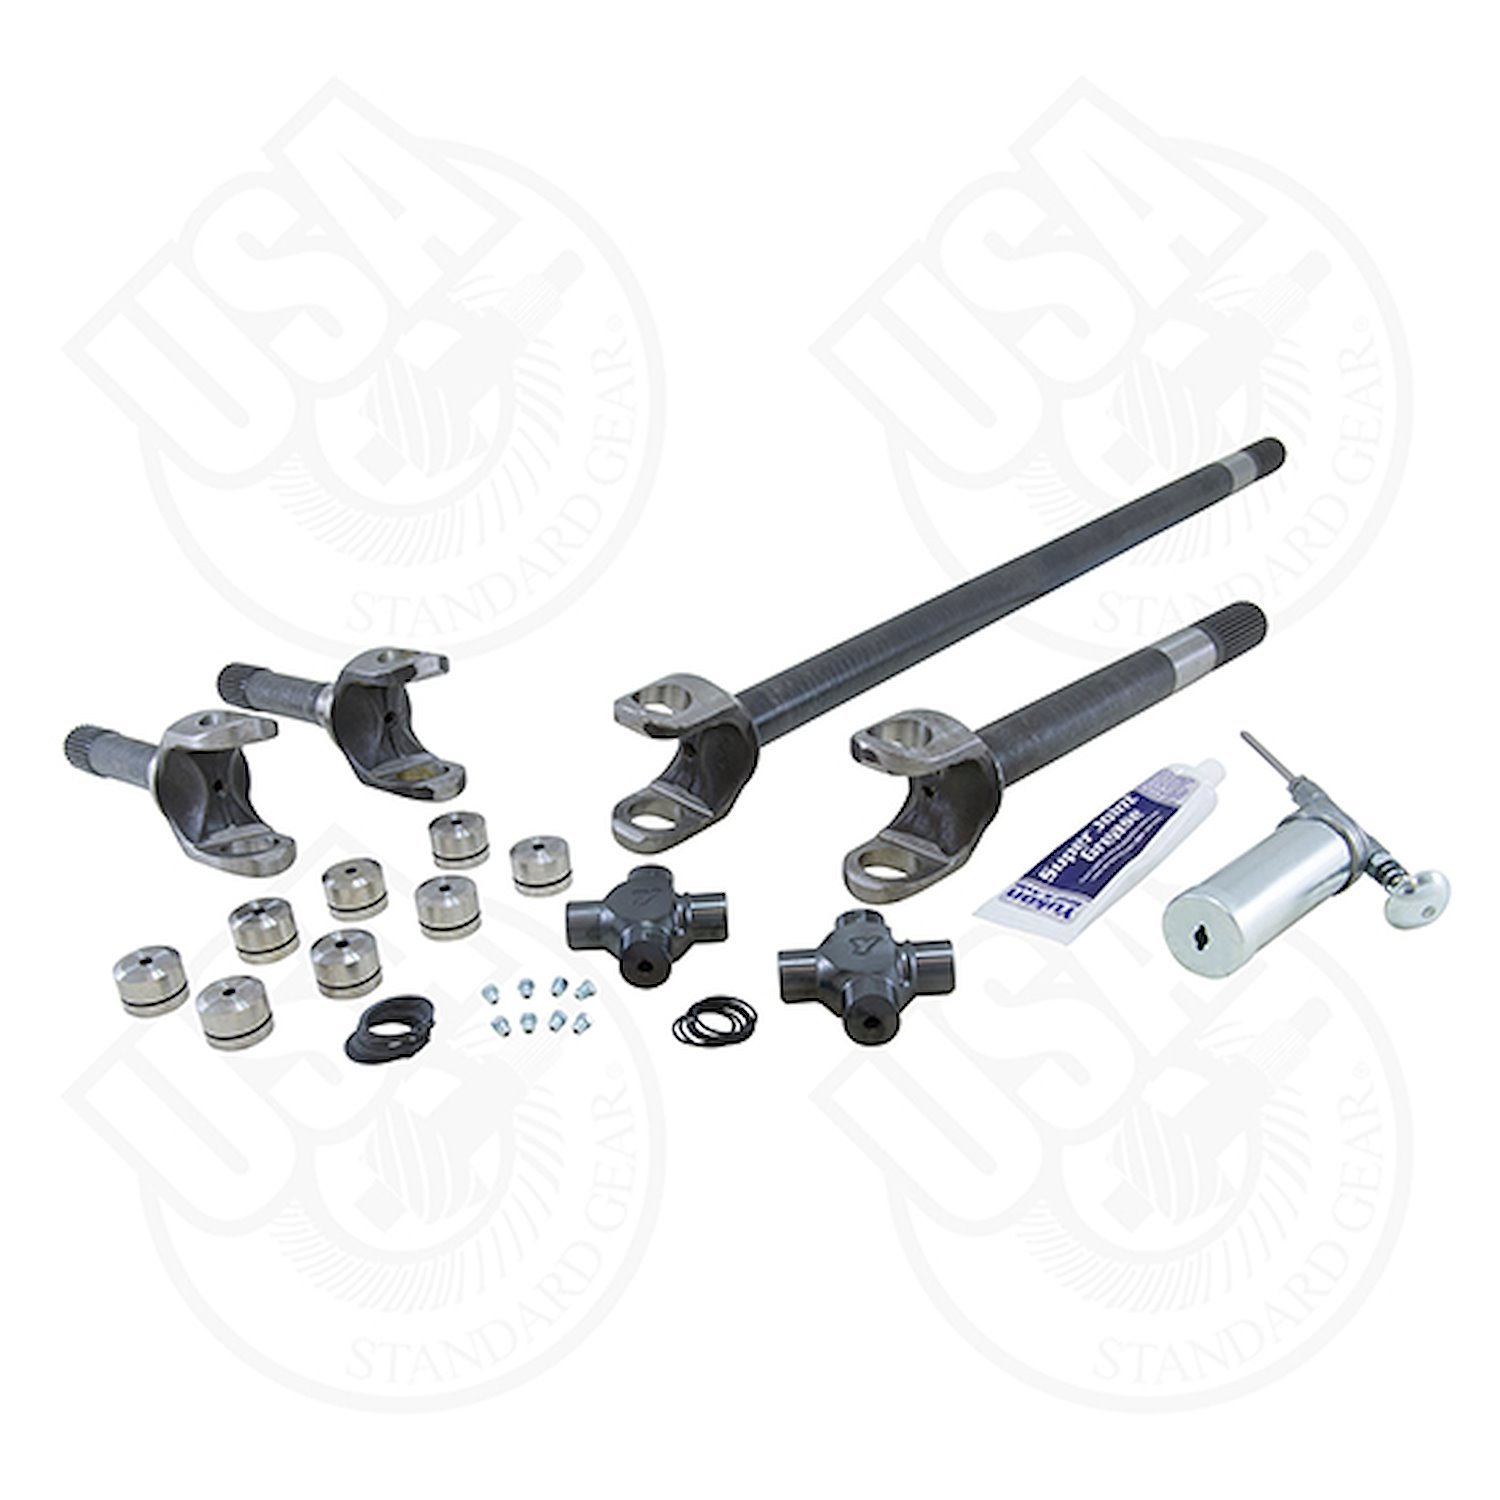 USA Standard 4340 Chrome-Moly replacement axle kit for